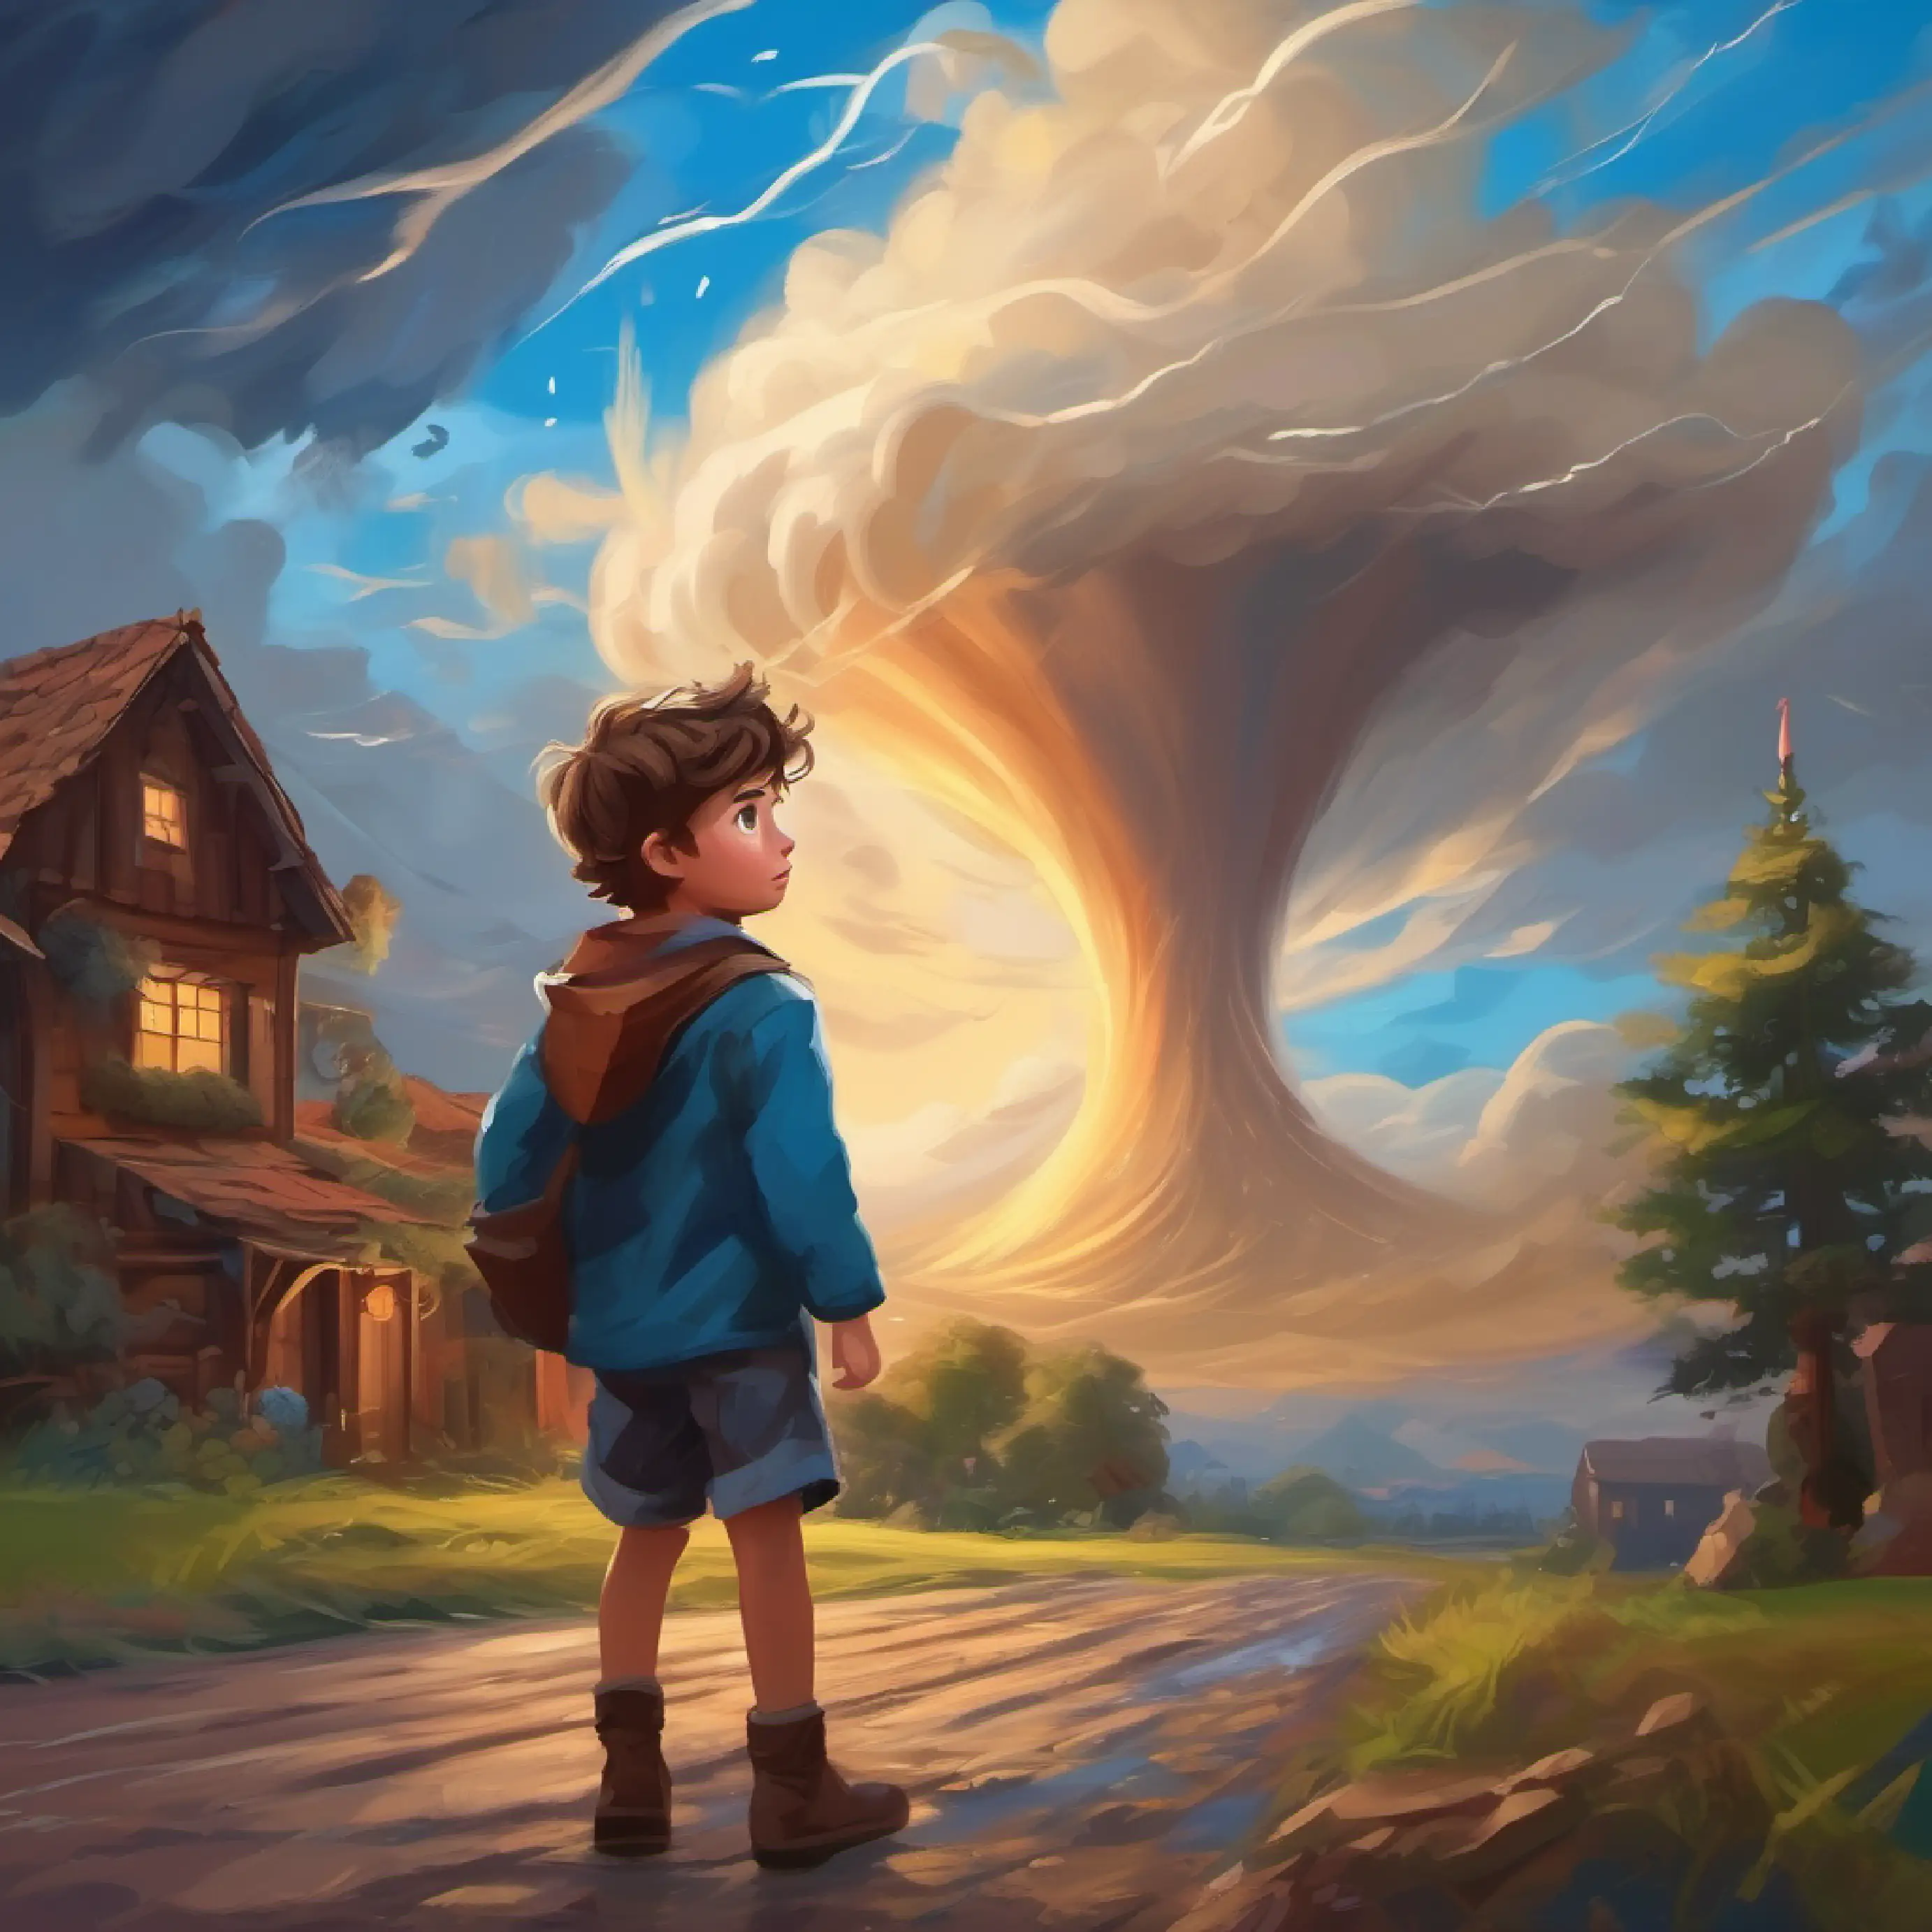 The tornado reveals Young boy, adventurous spirit, brown hair, blue eyes's destiny to be one with the storm.